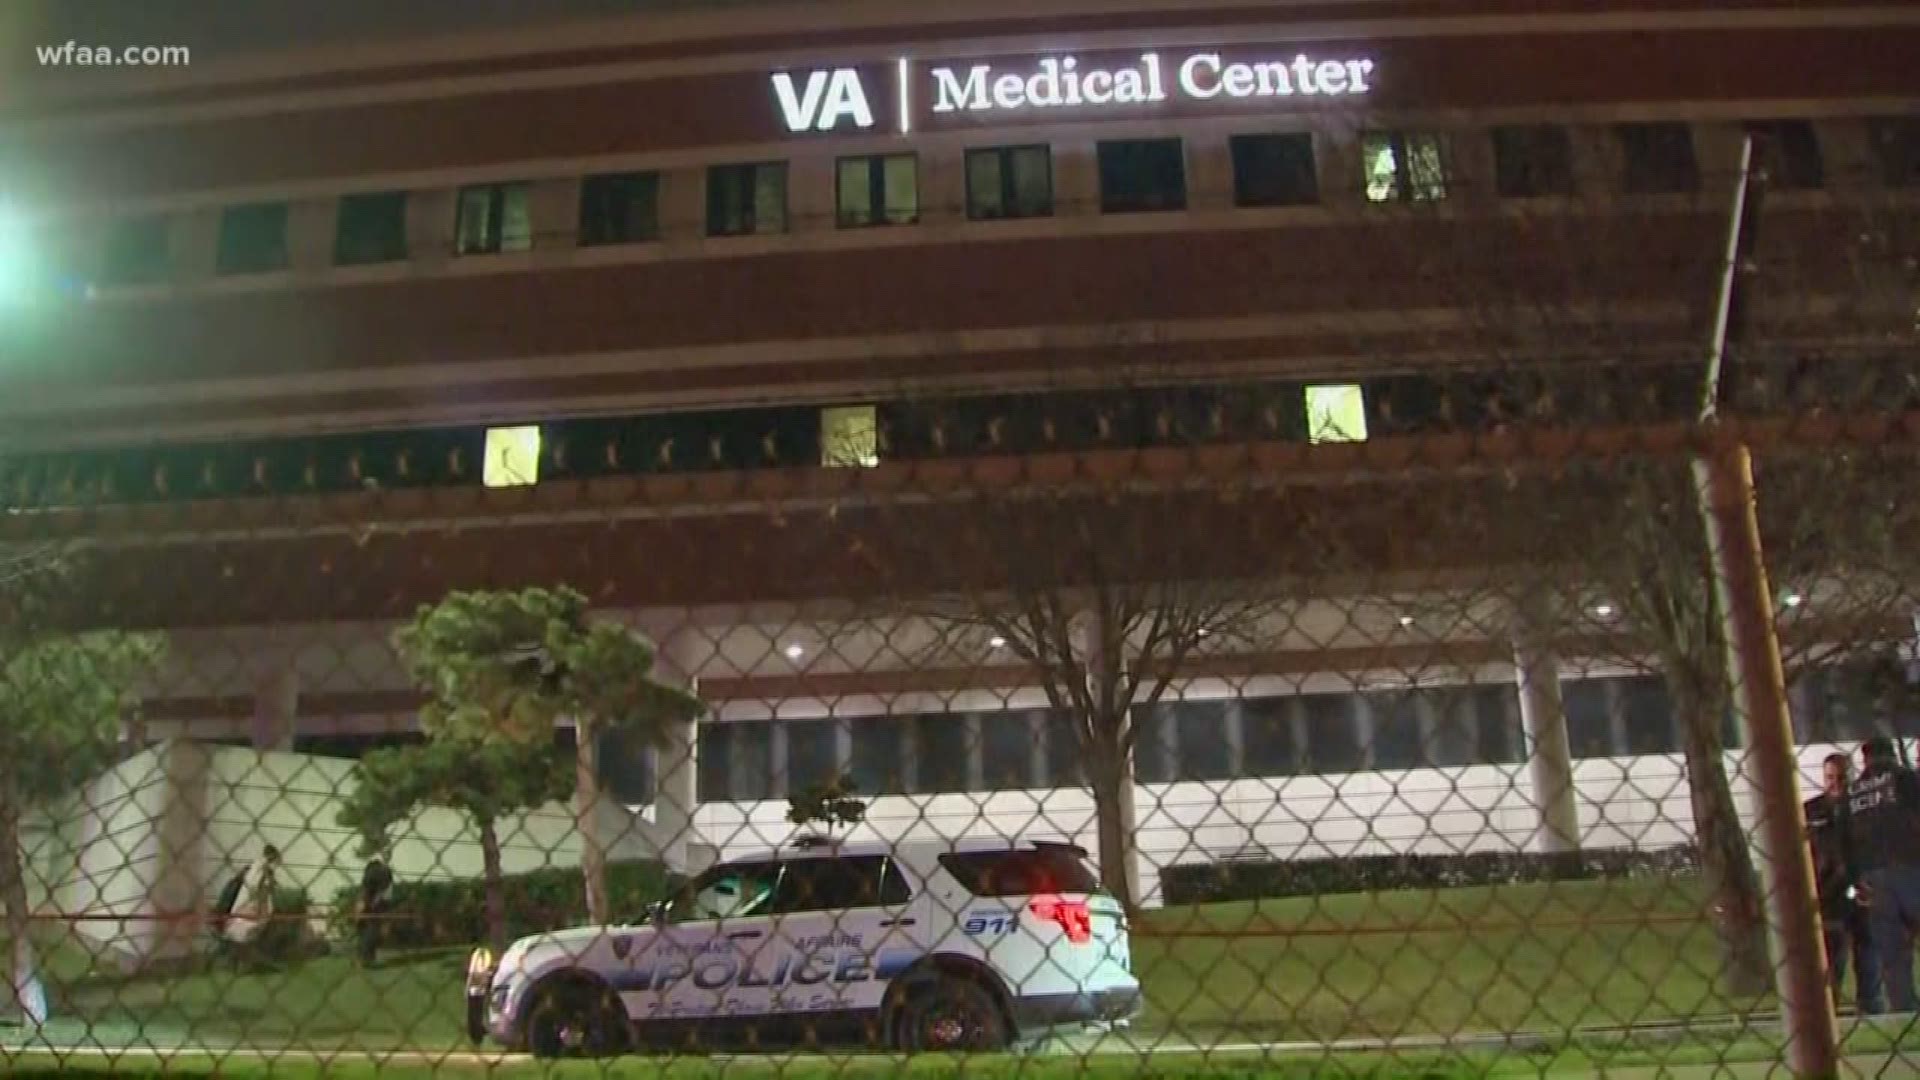 According to VA officers, the incident began when a man armed with a knife had come to the hospital asking for psychiatric treatment, Dallas police said.